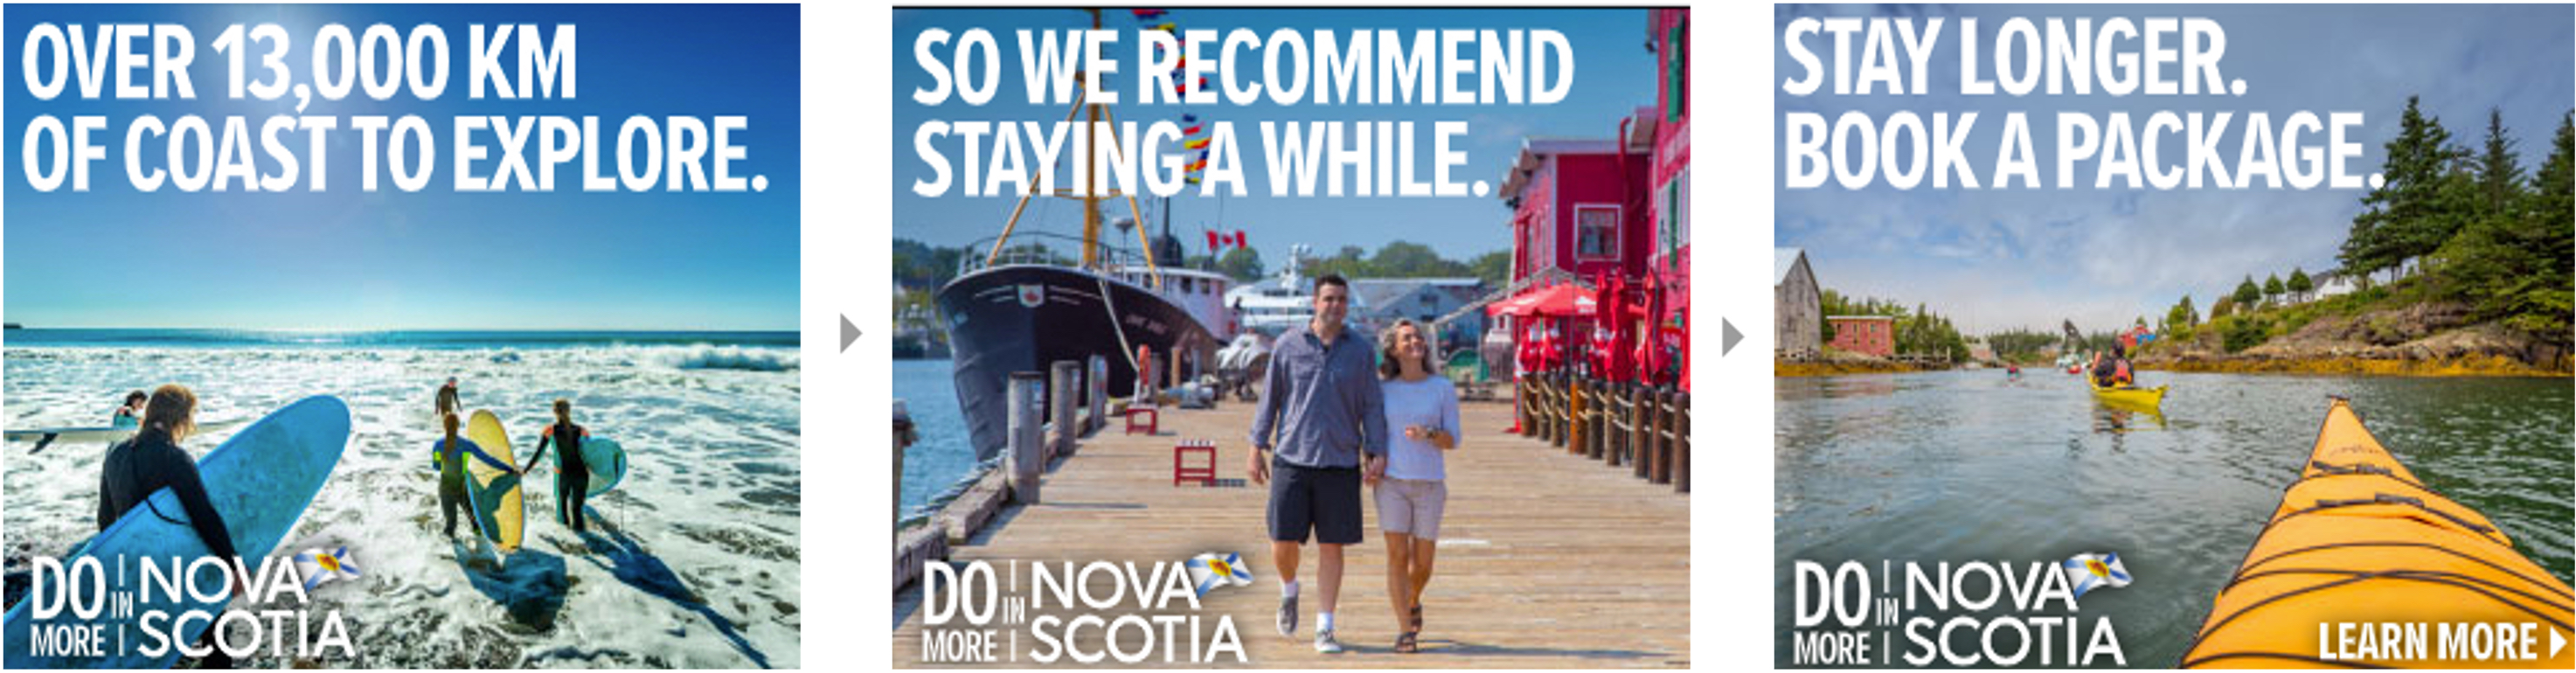 Three rectangular images side by side depicting a digital display ad. The first image is a group of people surfing, the second is a man and woman holding hands and walking along the Lunenburg waterfront beside a tall ship and a red building. The third image is a group of people kayaking near boat sheds. The text reads Book Your Long Stay Package.